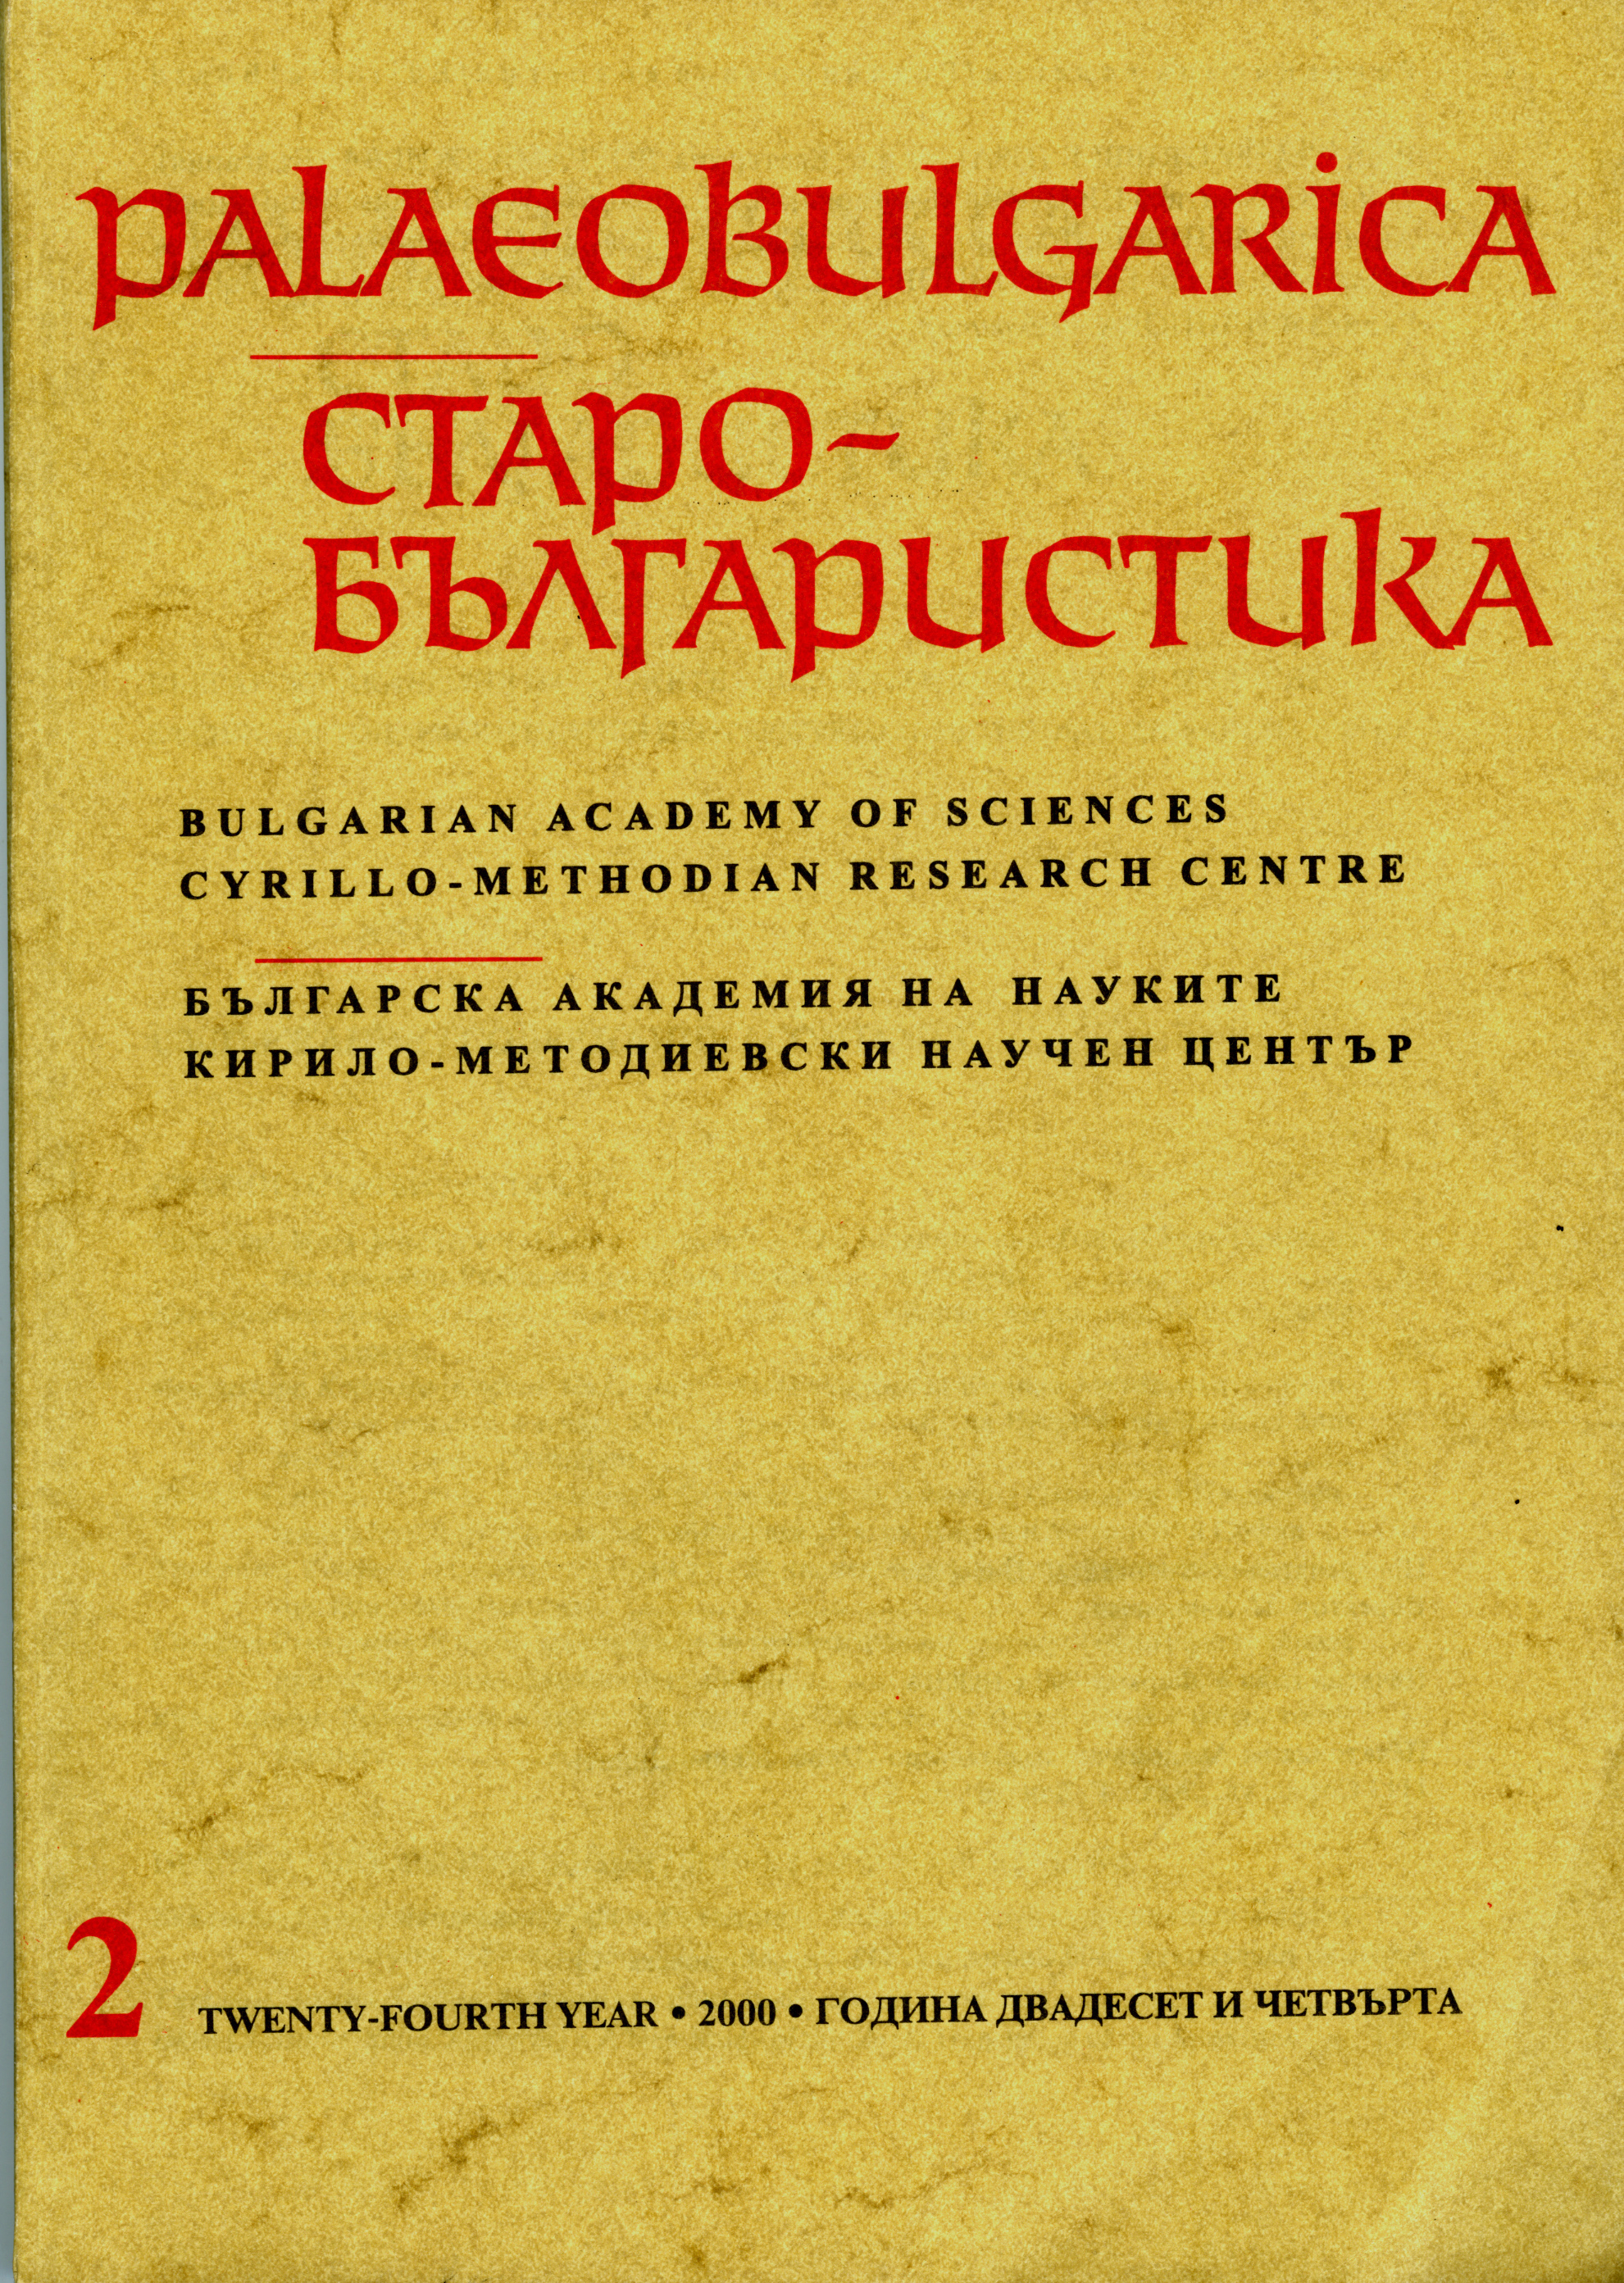 A New Study of the Slavic Translation of the Apostolos Cover Image